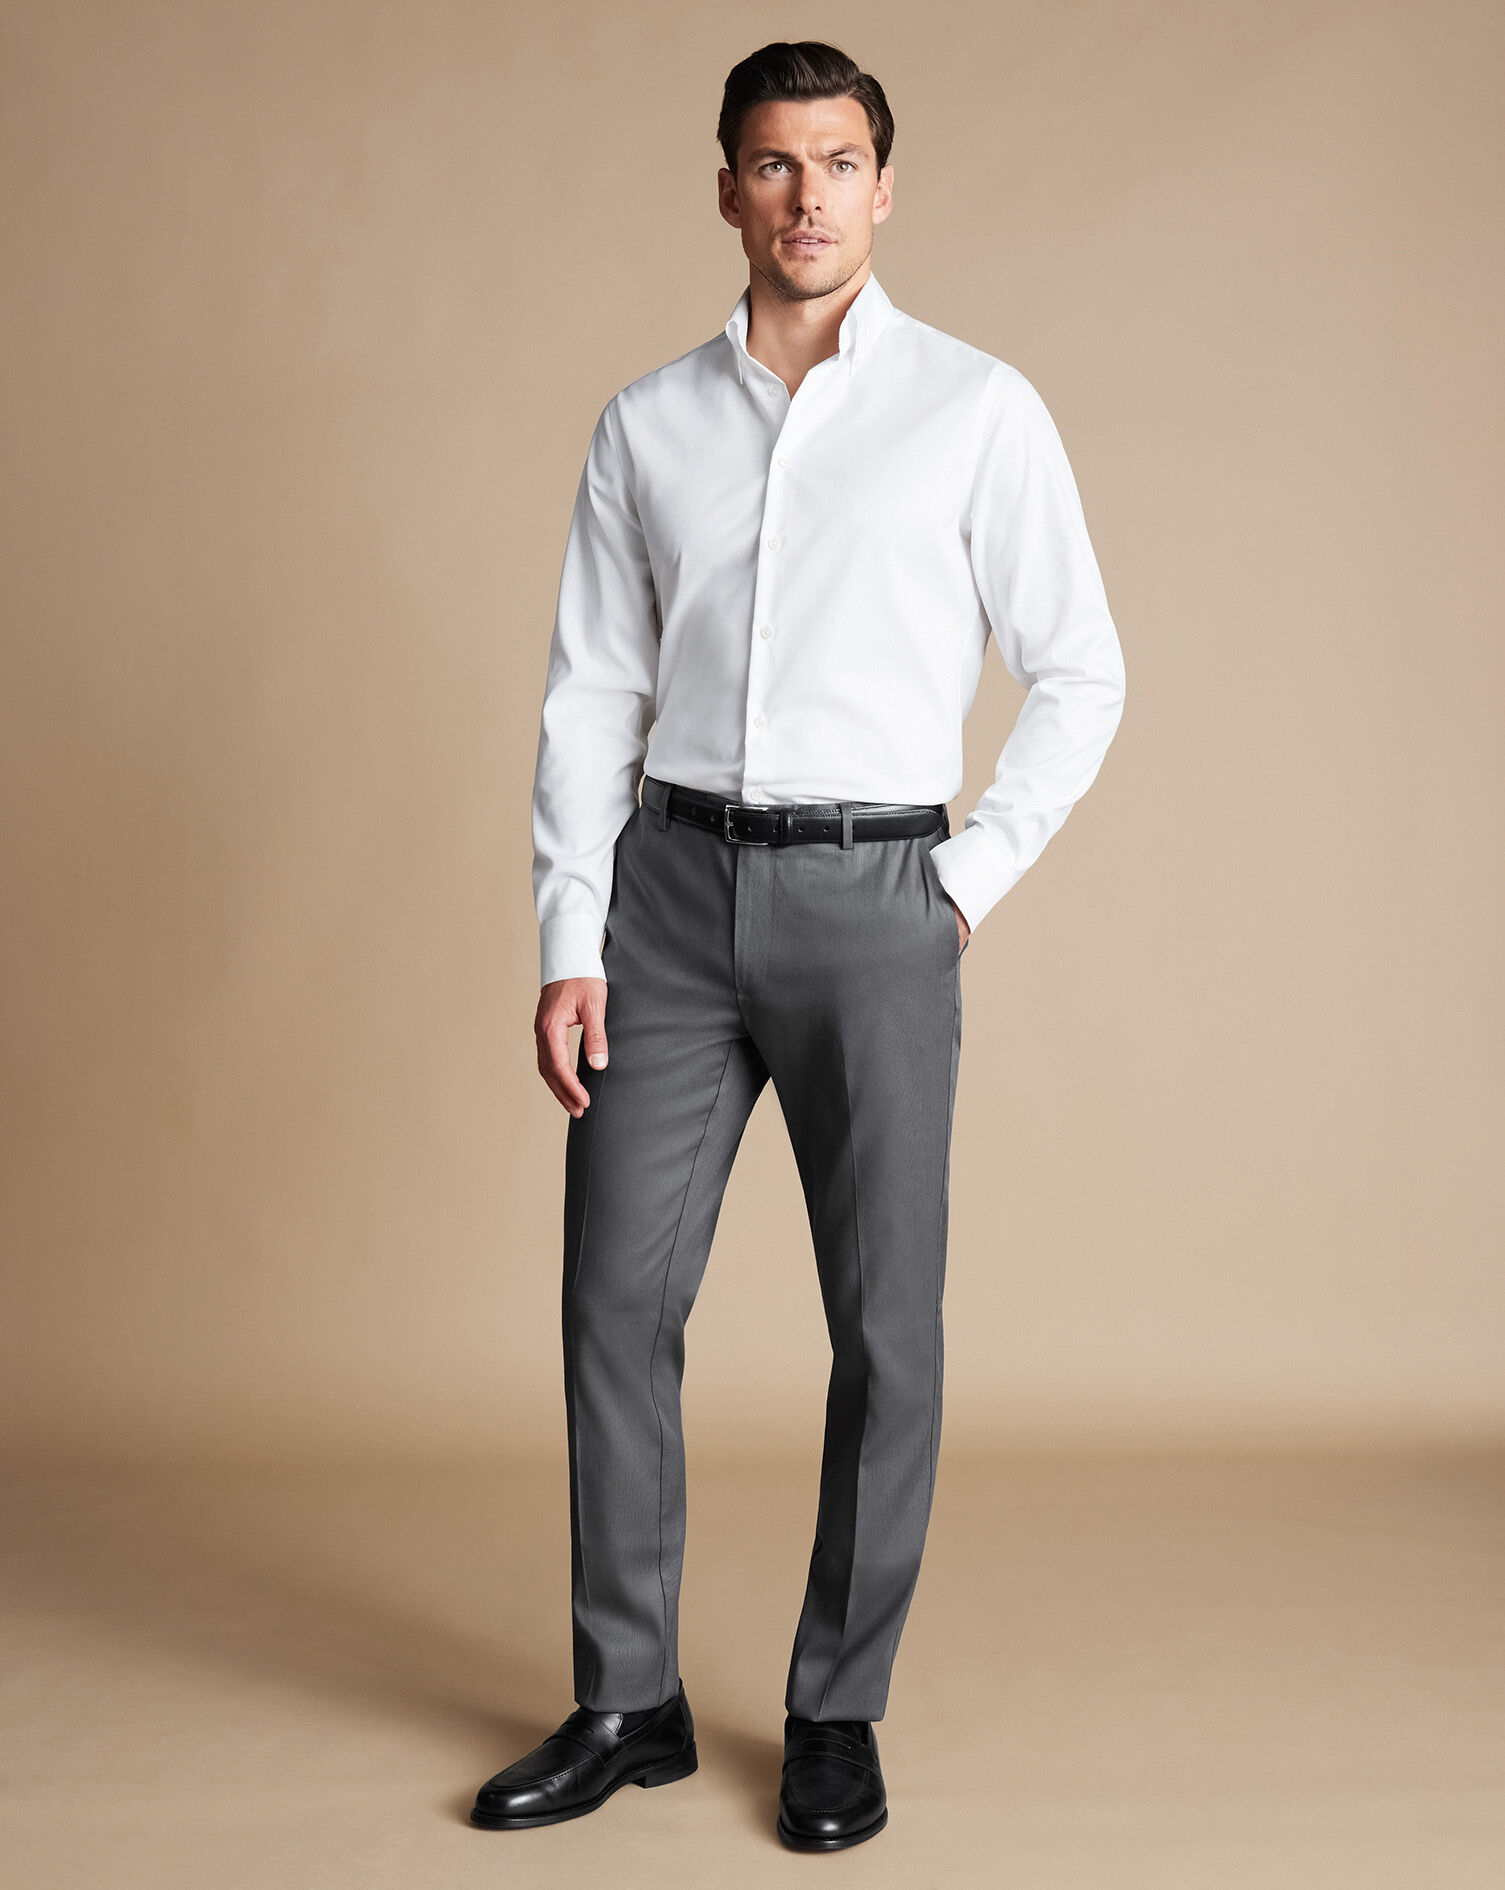 Your Guide to the Best Men's White Shirt and Pants Combinations - The Manual